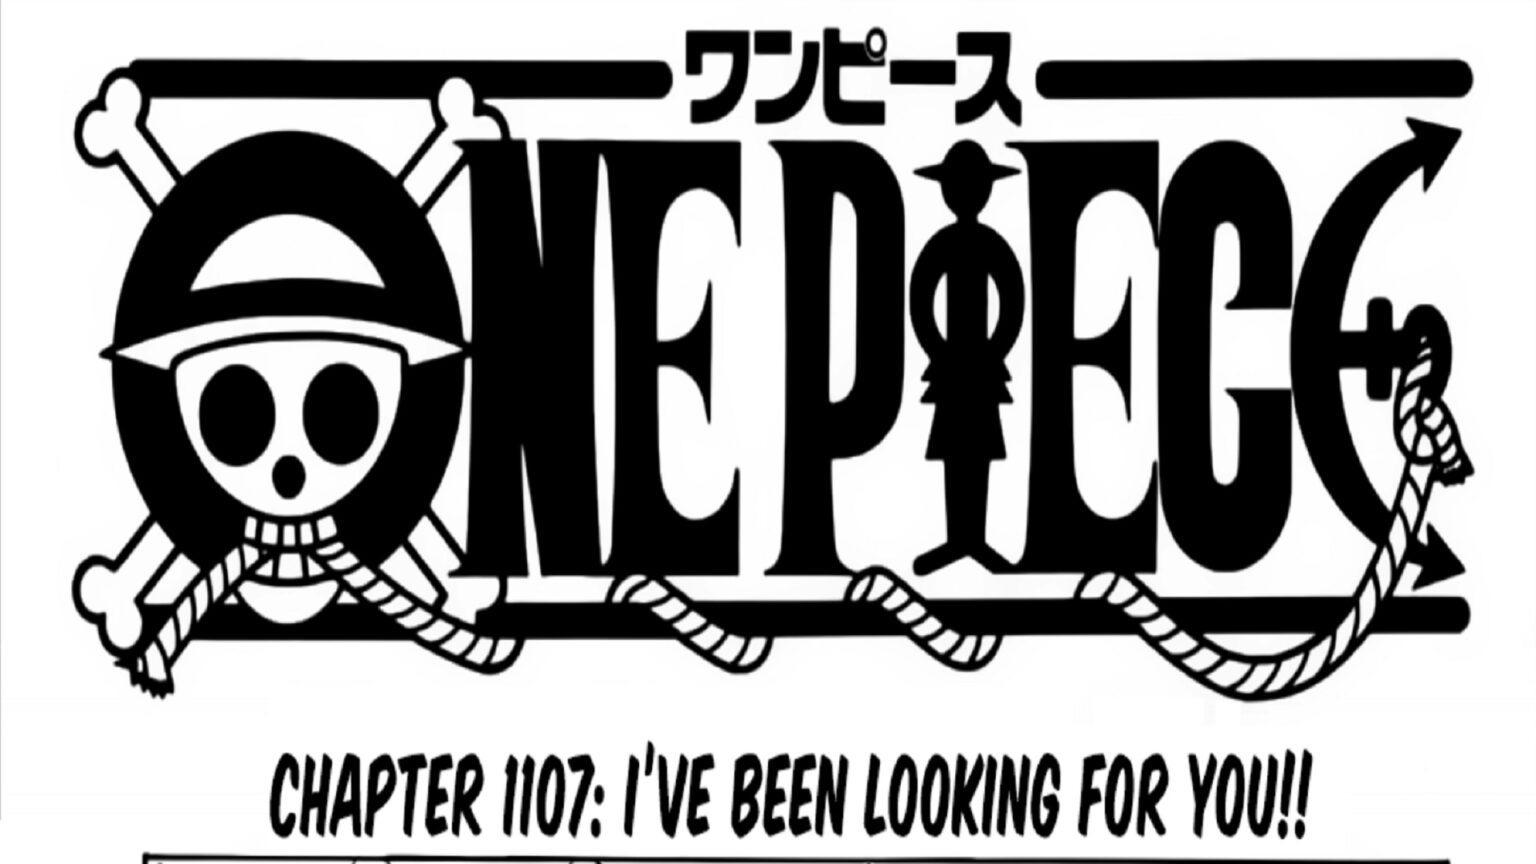 One Piece Chapter 1107 is on fire.